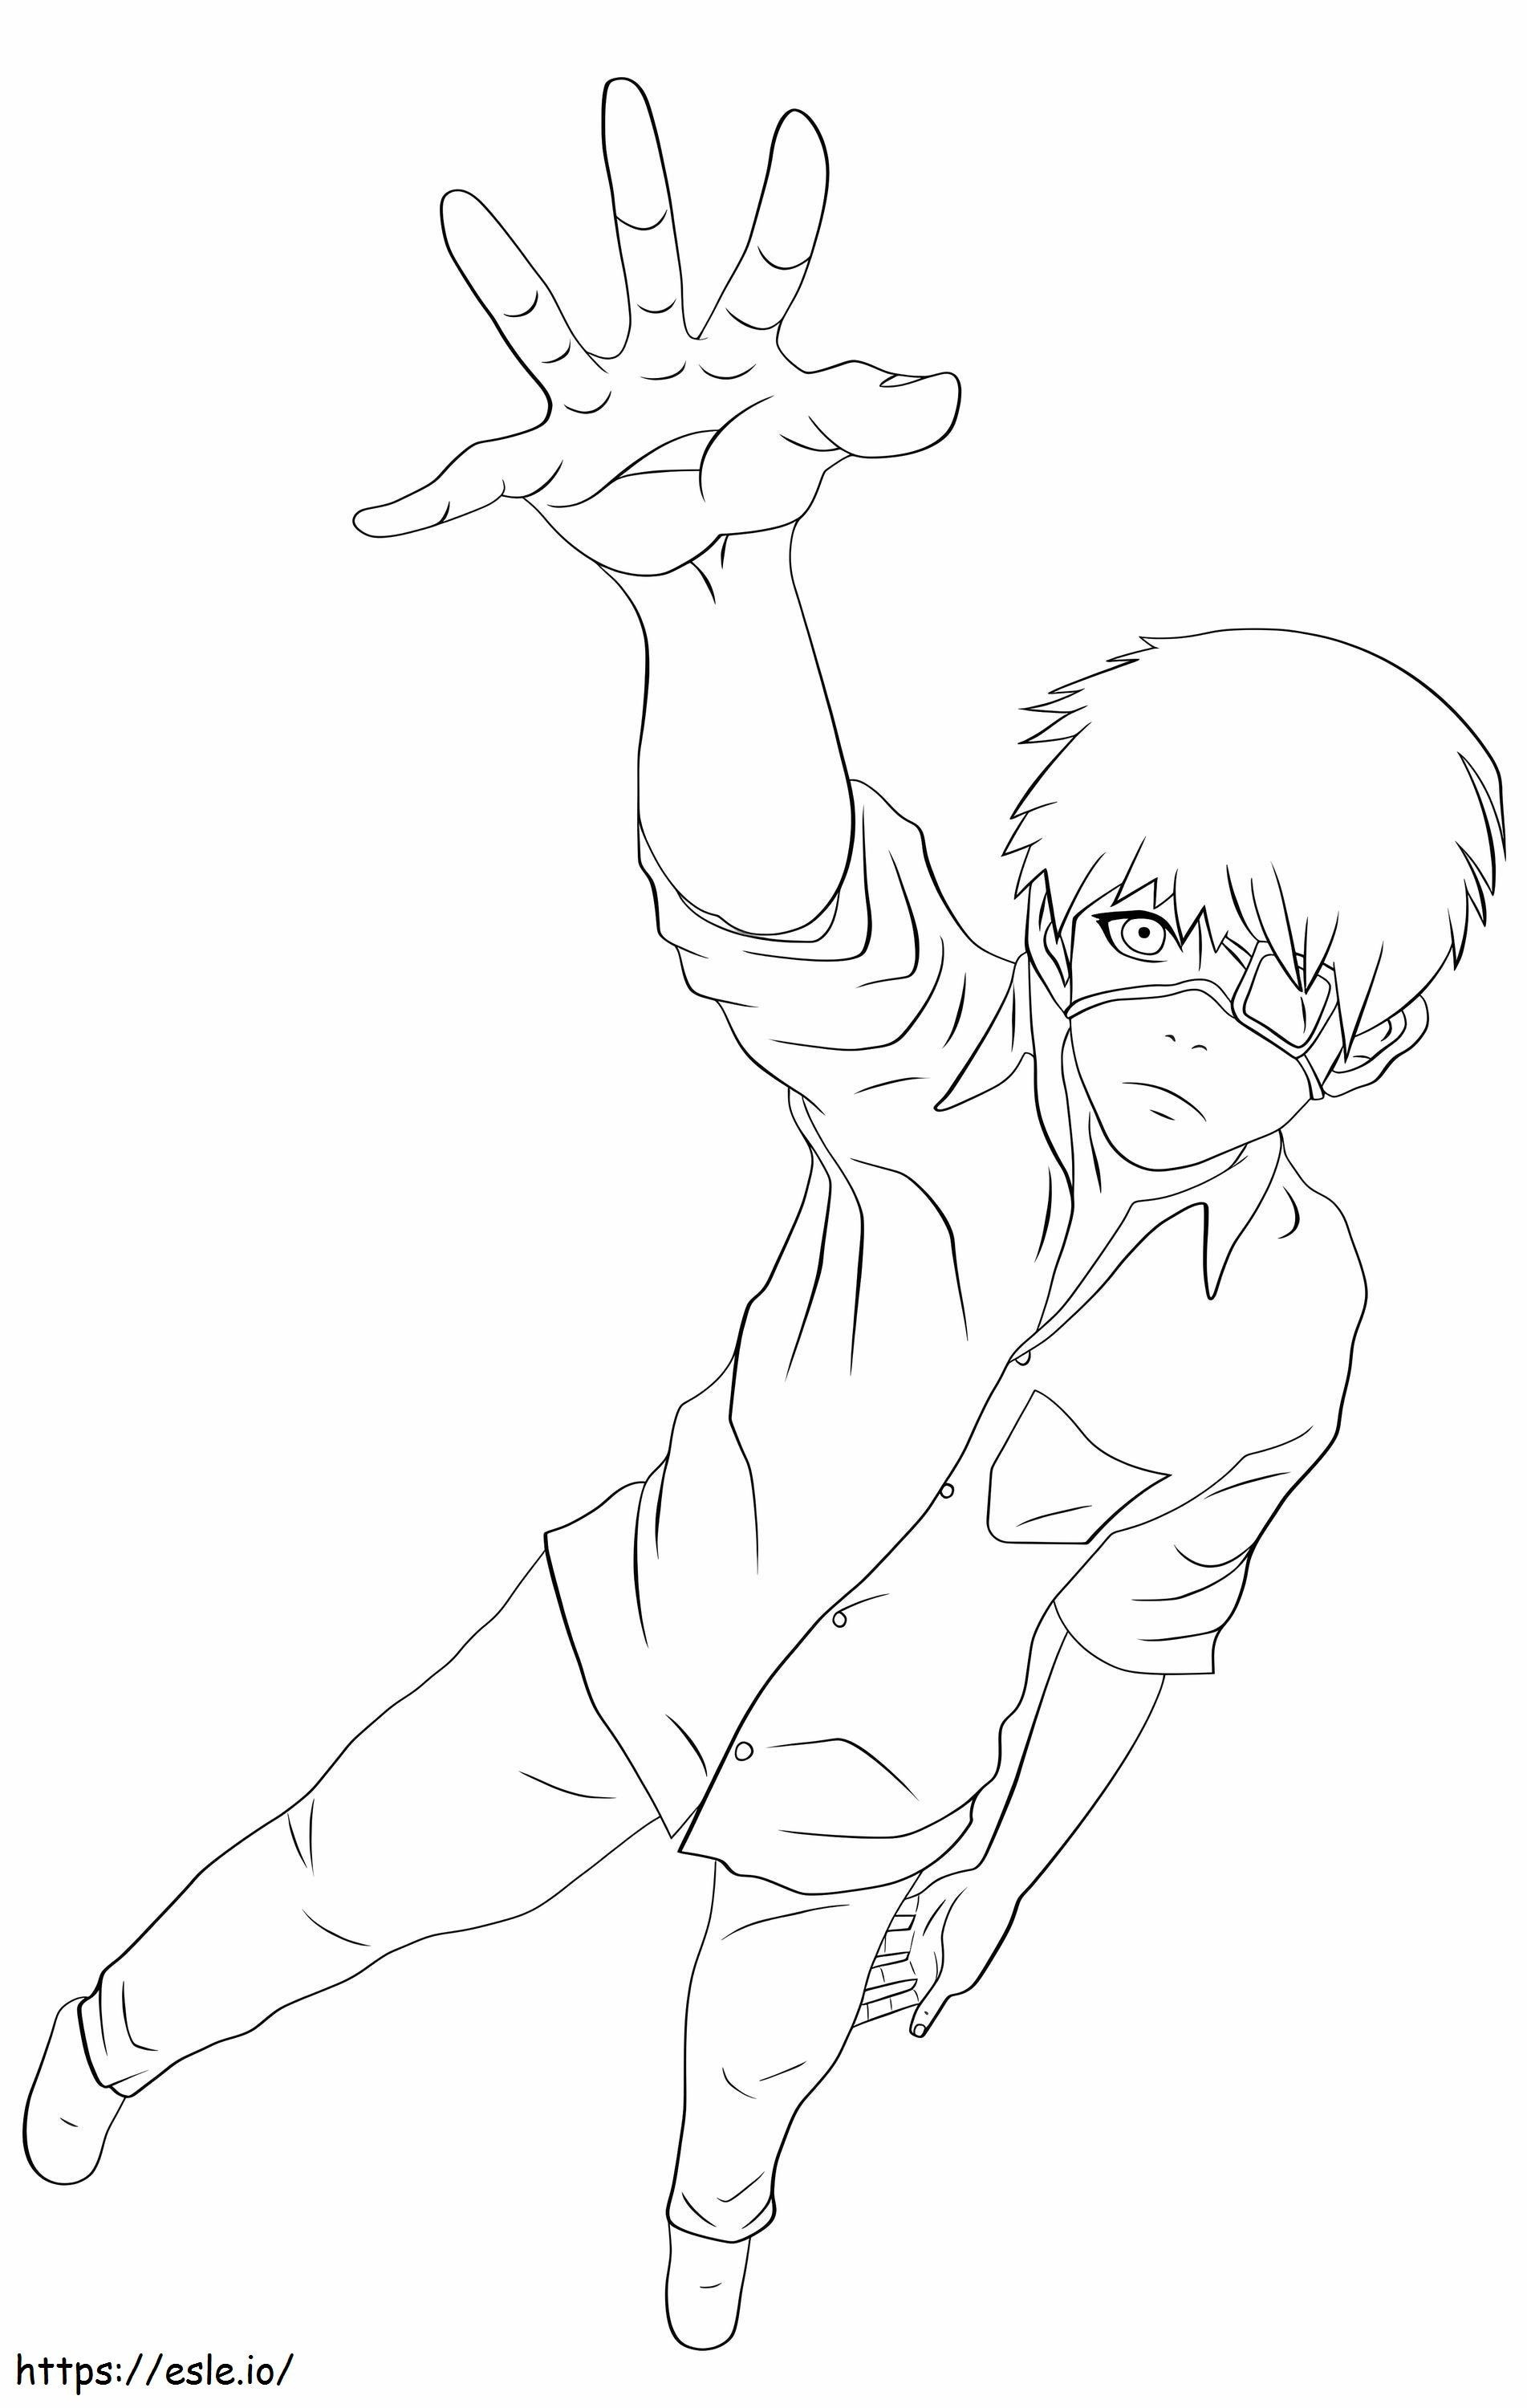 Fast Tokyo Ghoul coloring page